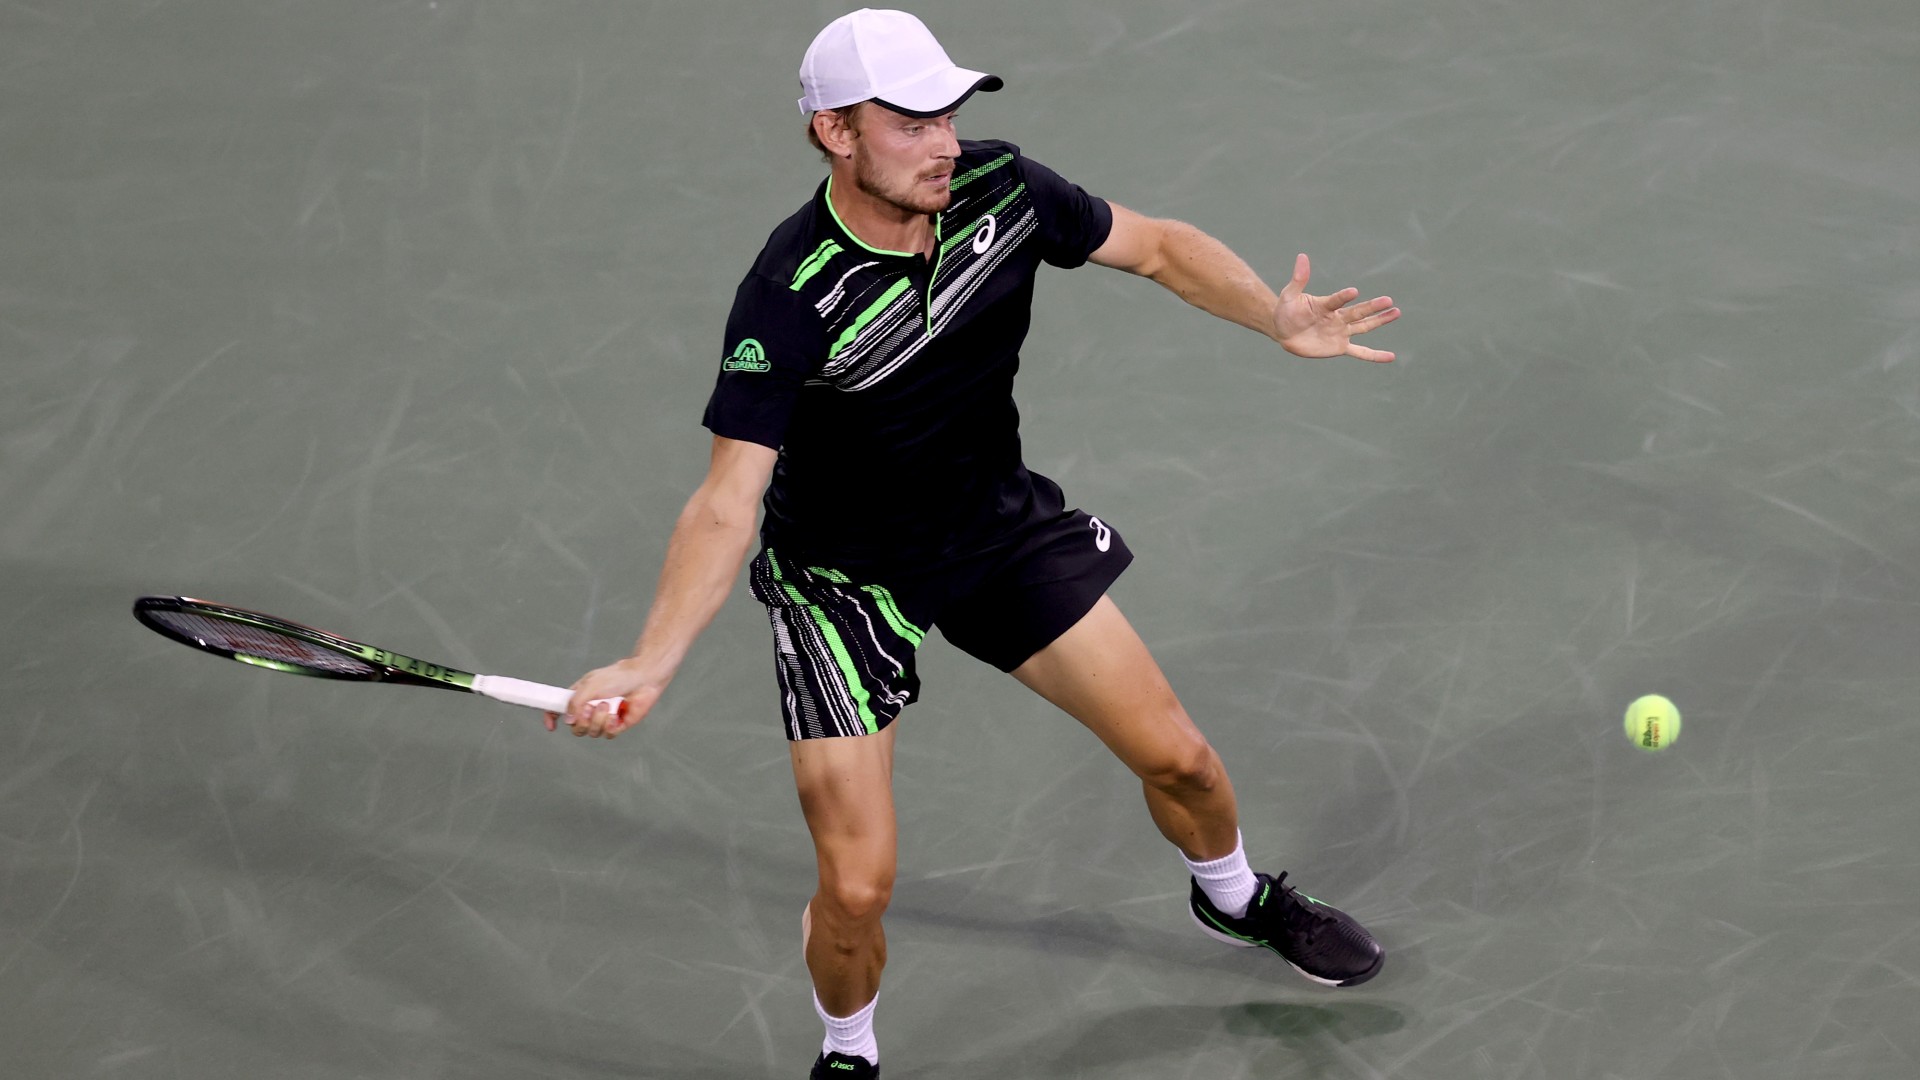 Pella ousts Goffin